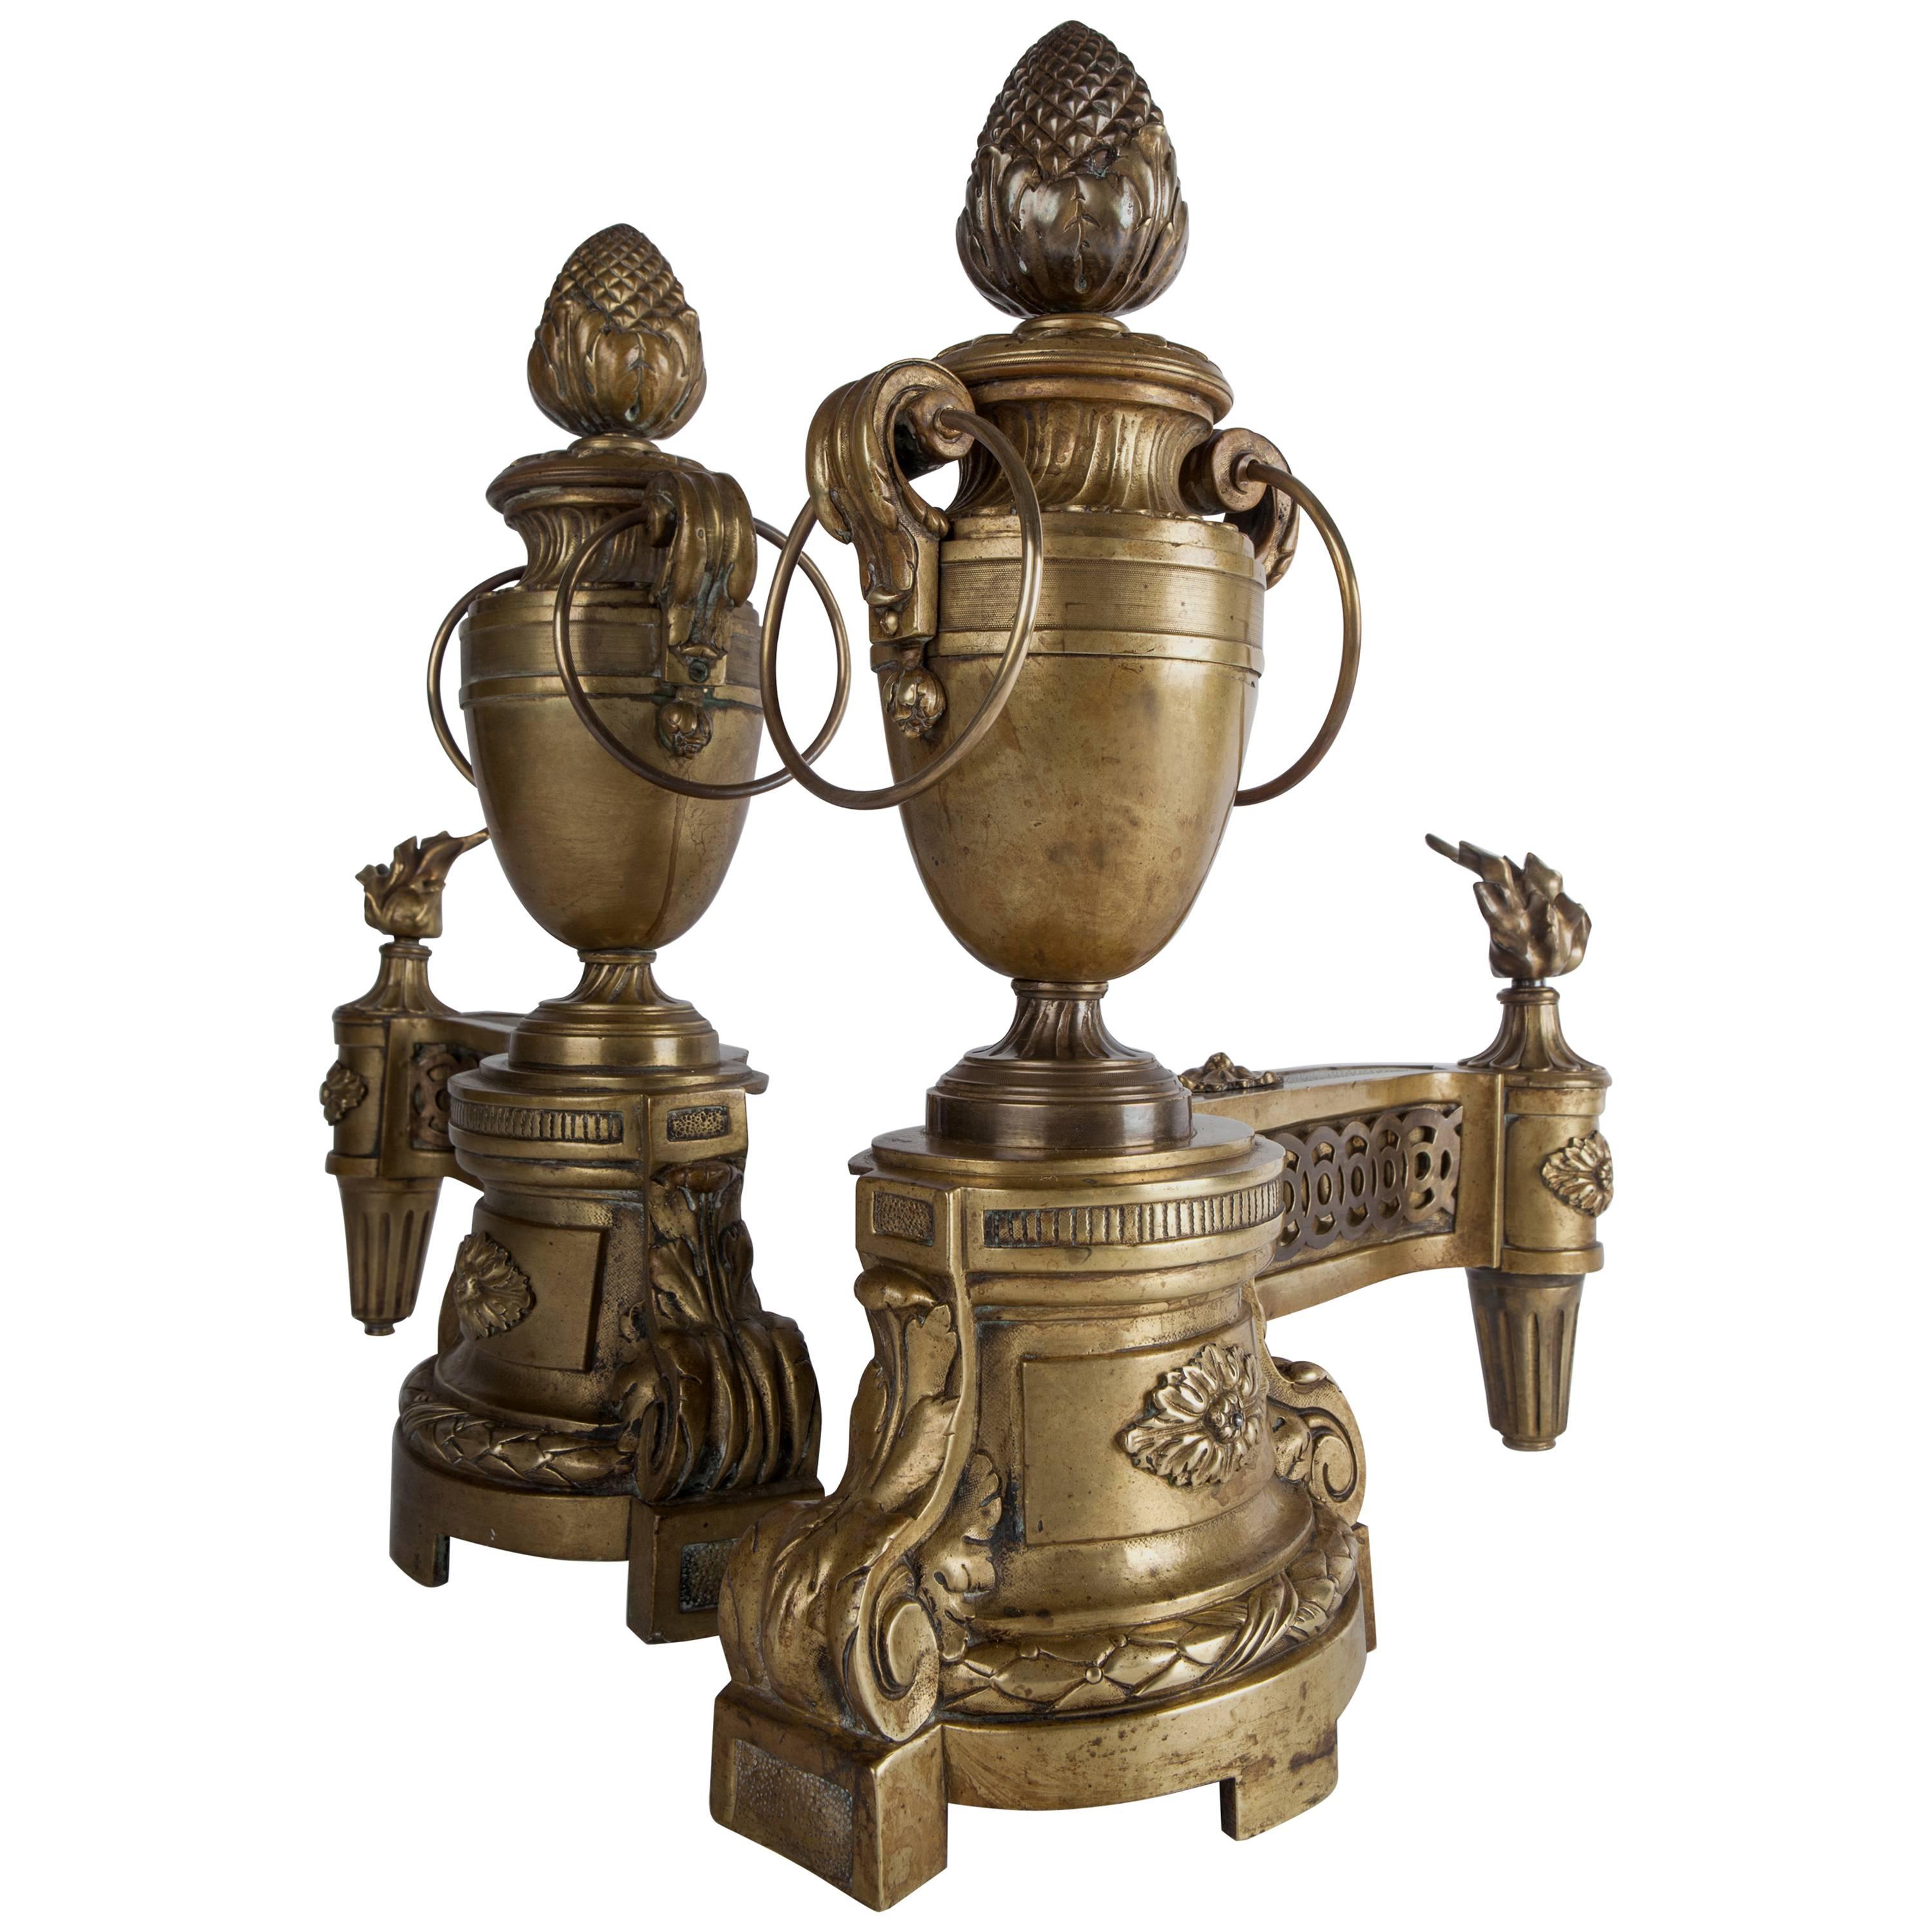 French Urn Form Chenets with Flame and Pinecone Finials in Aged Brass, c. 1860s For Sale